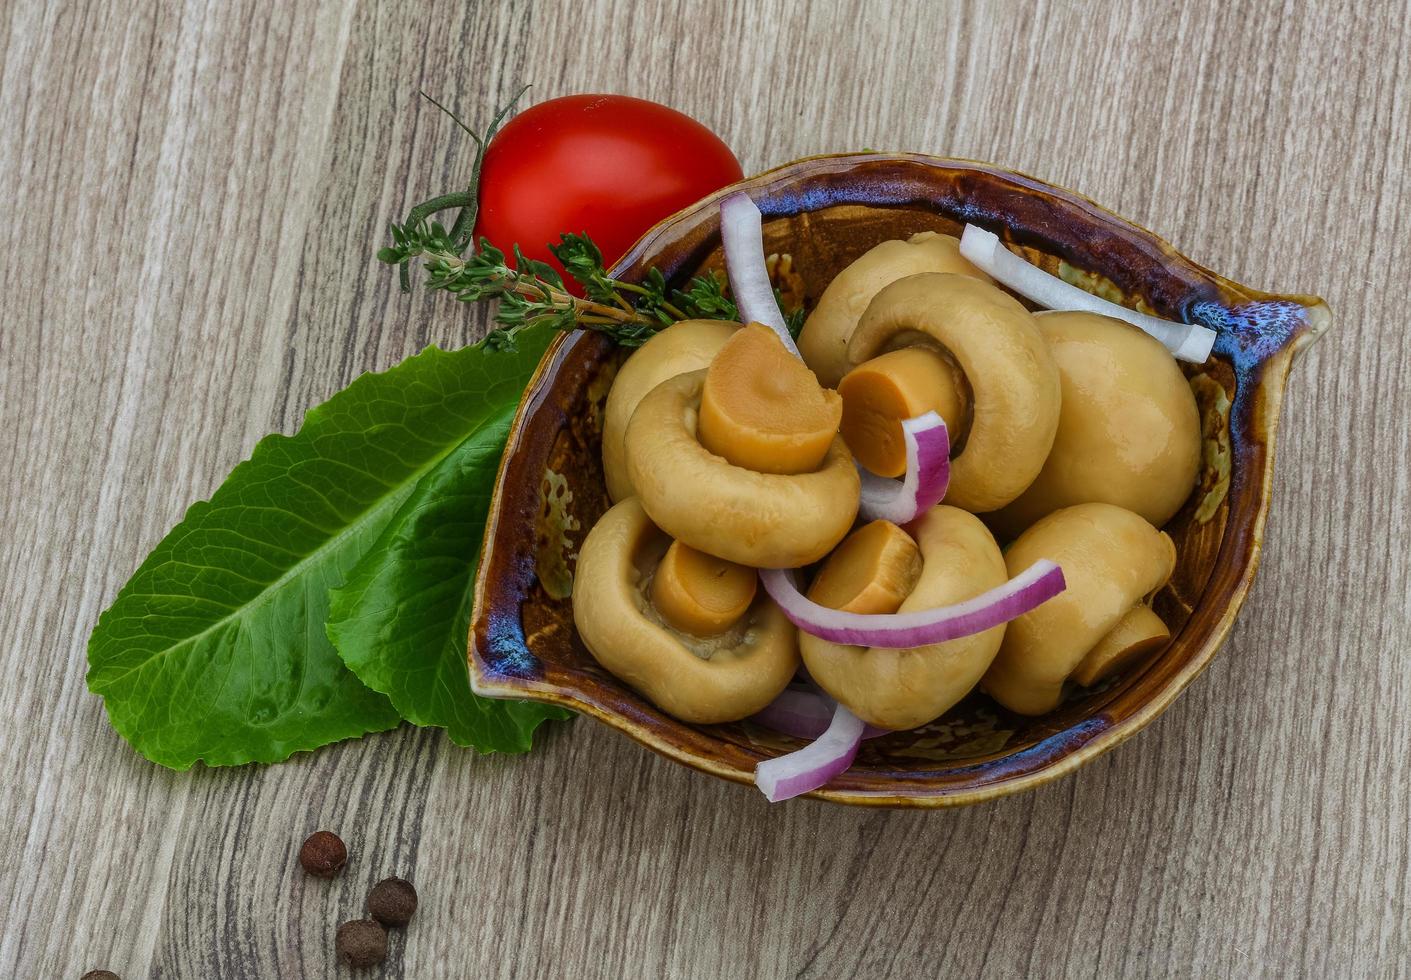 Pickled champignon in a bowl on wooden background photo